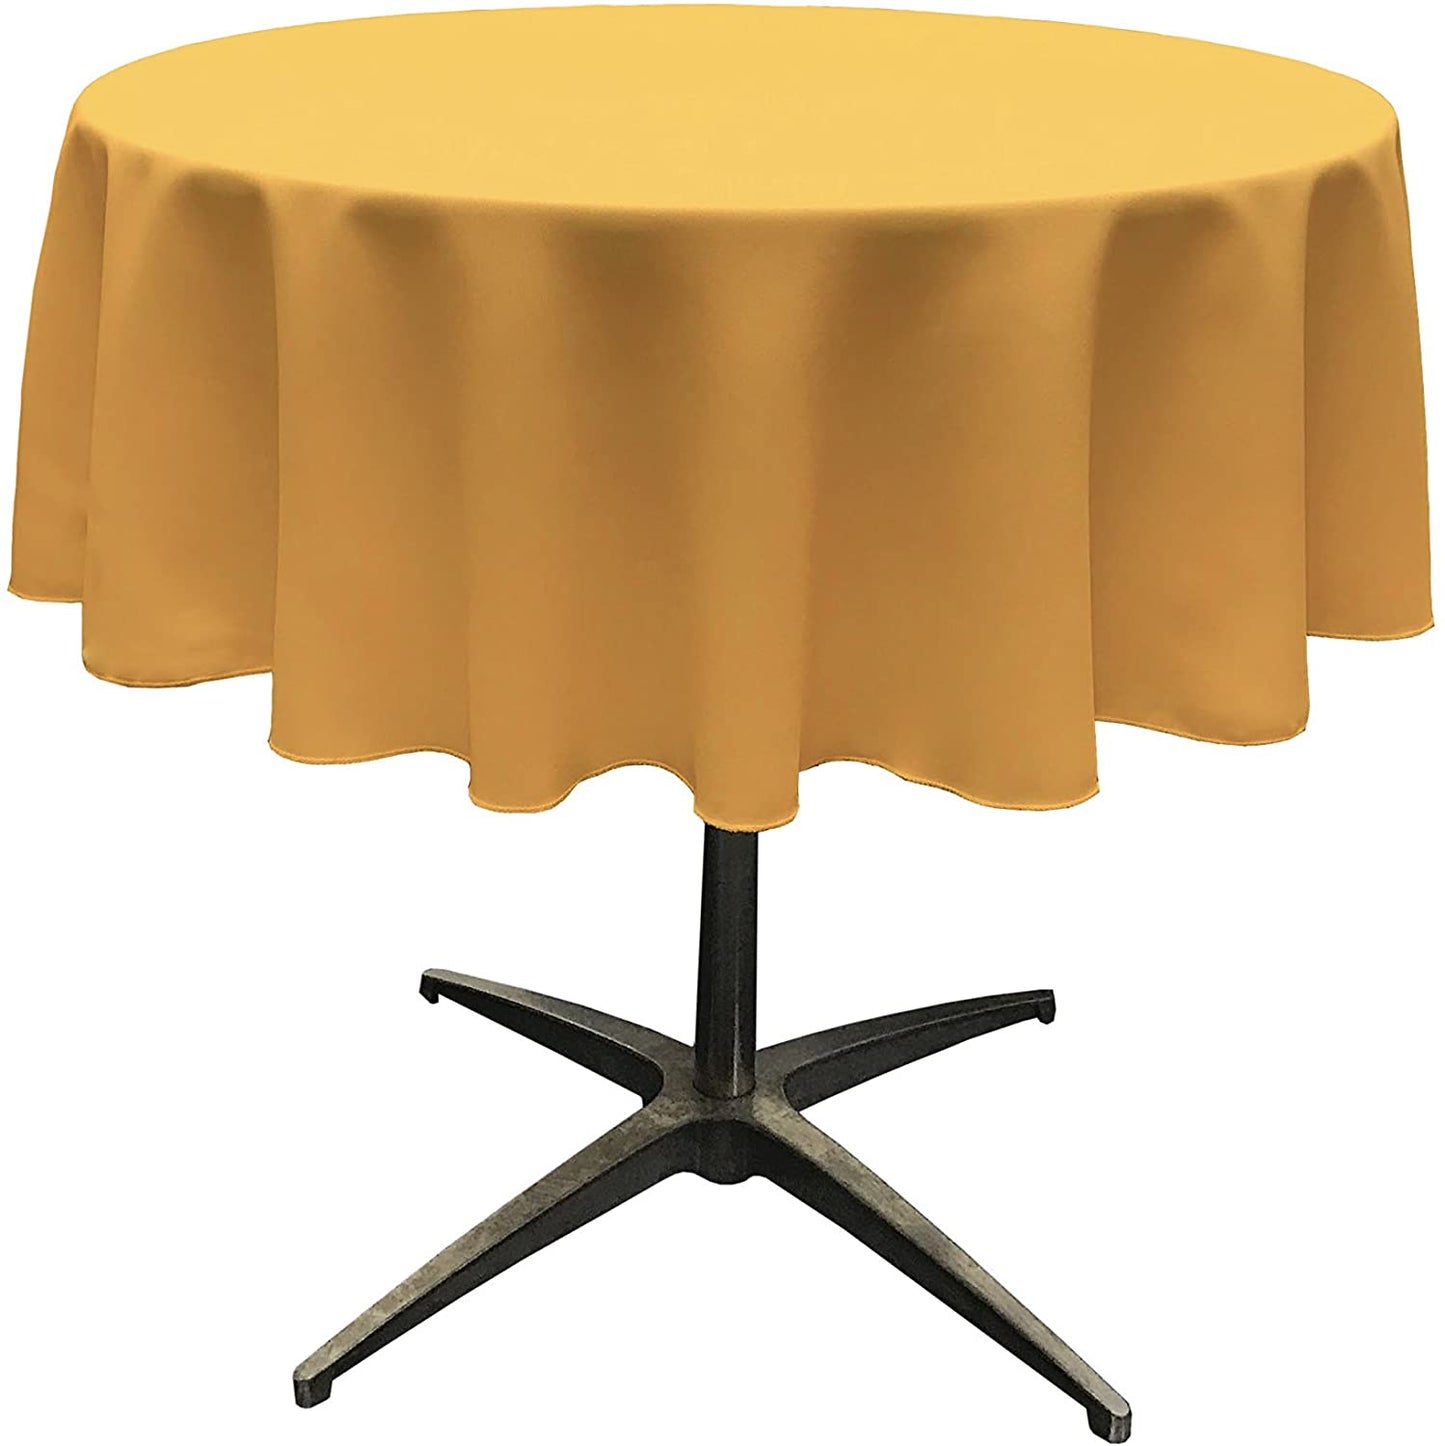 Polyester Poplin Washable Round Tablecloth, Stain and Wrinkle Resistant Table Cover Gold